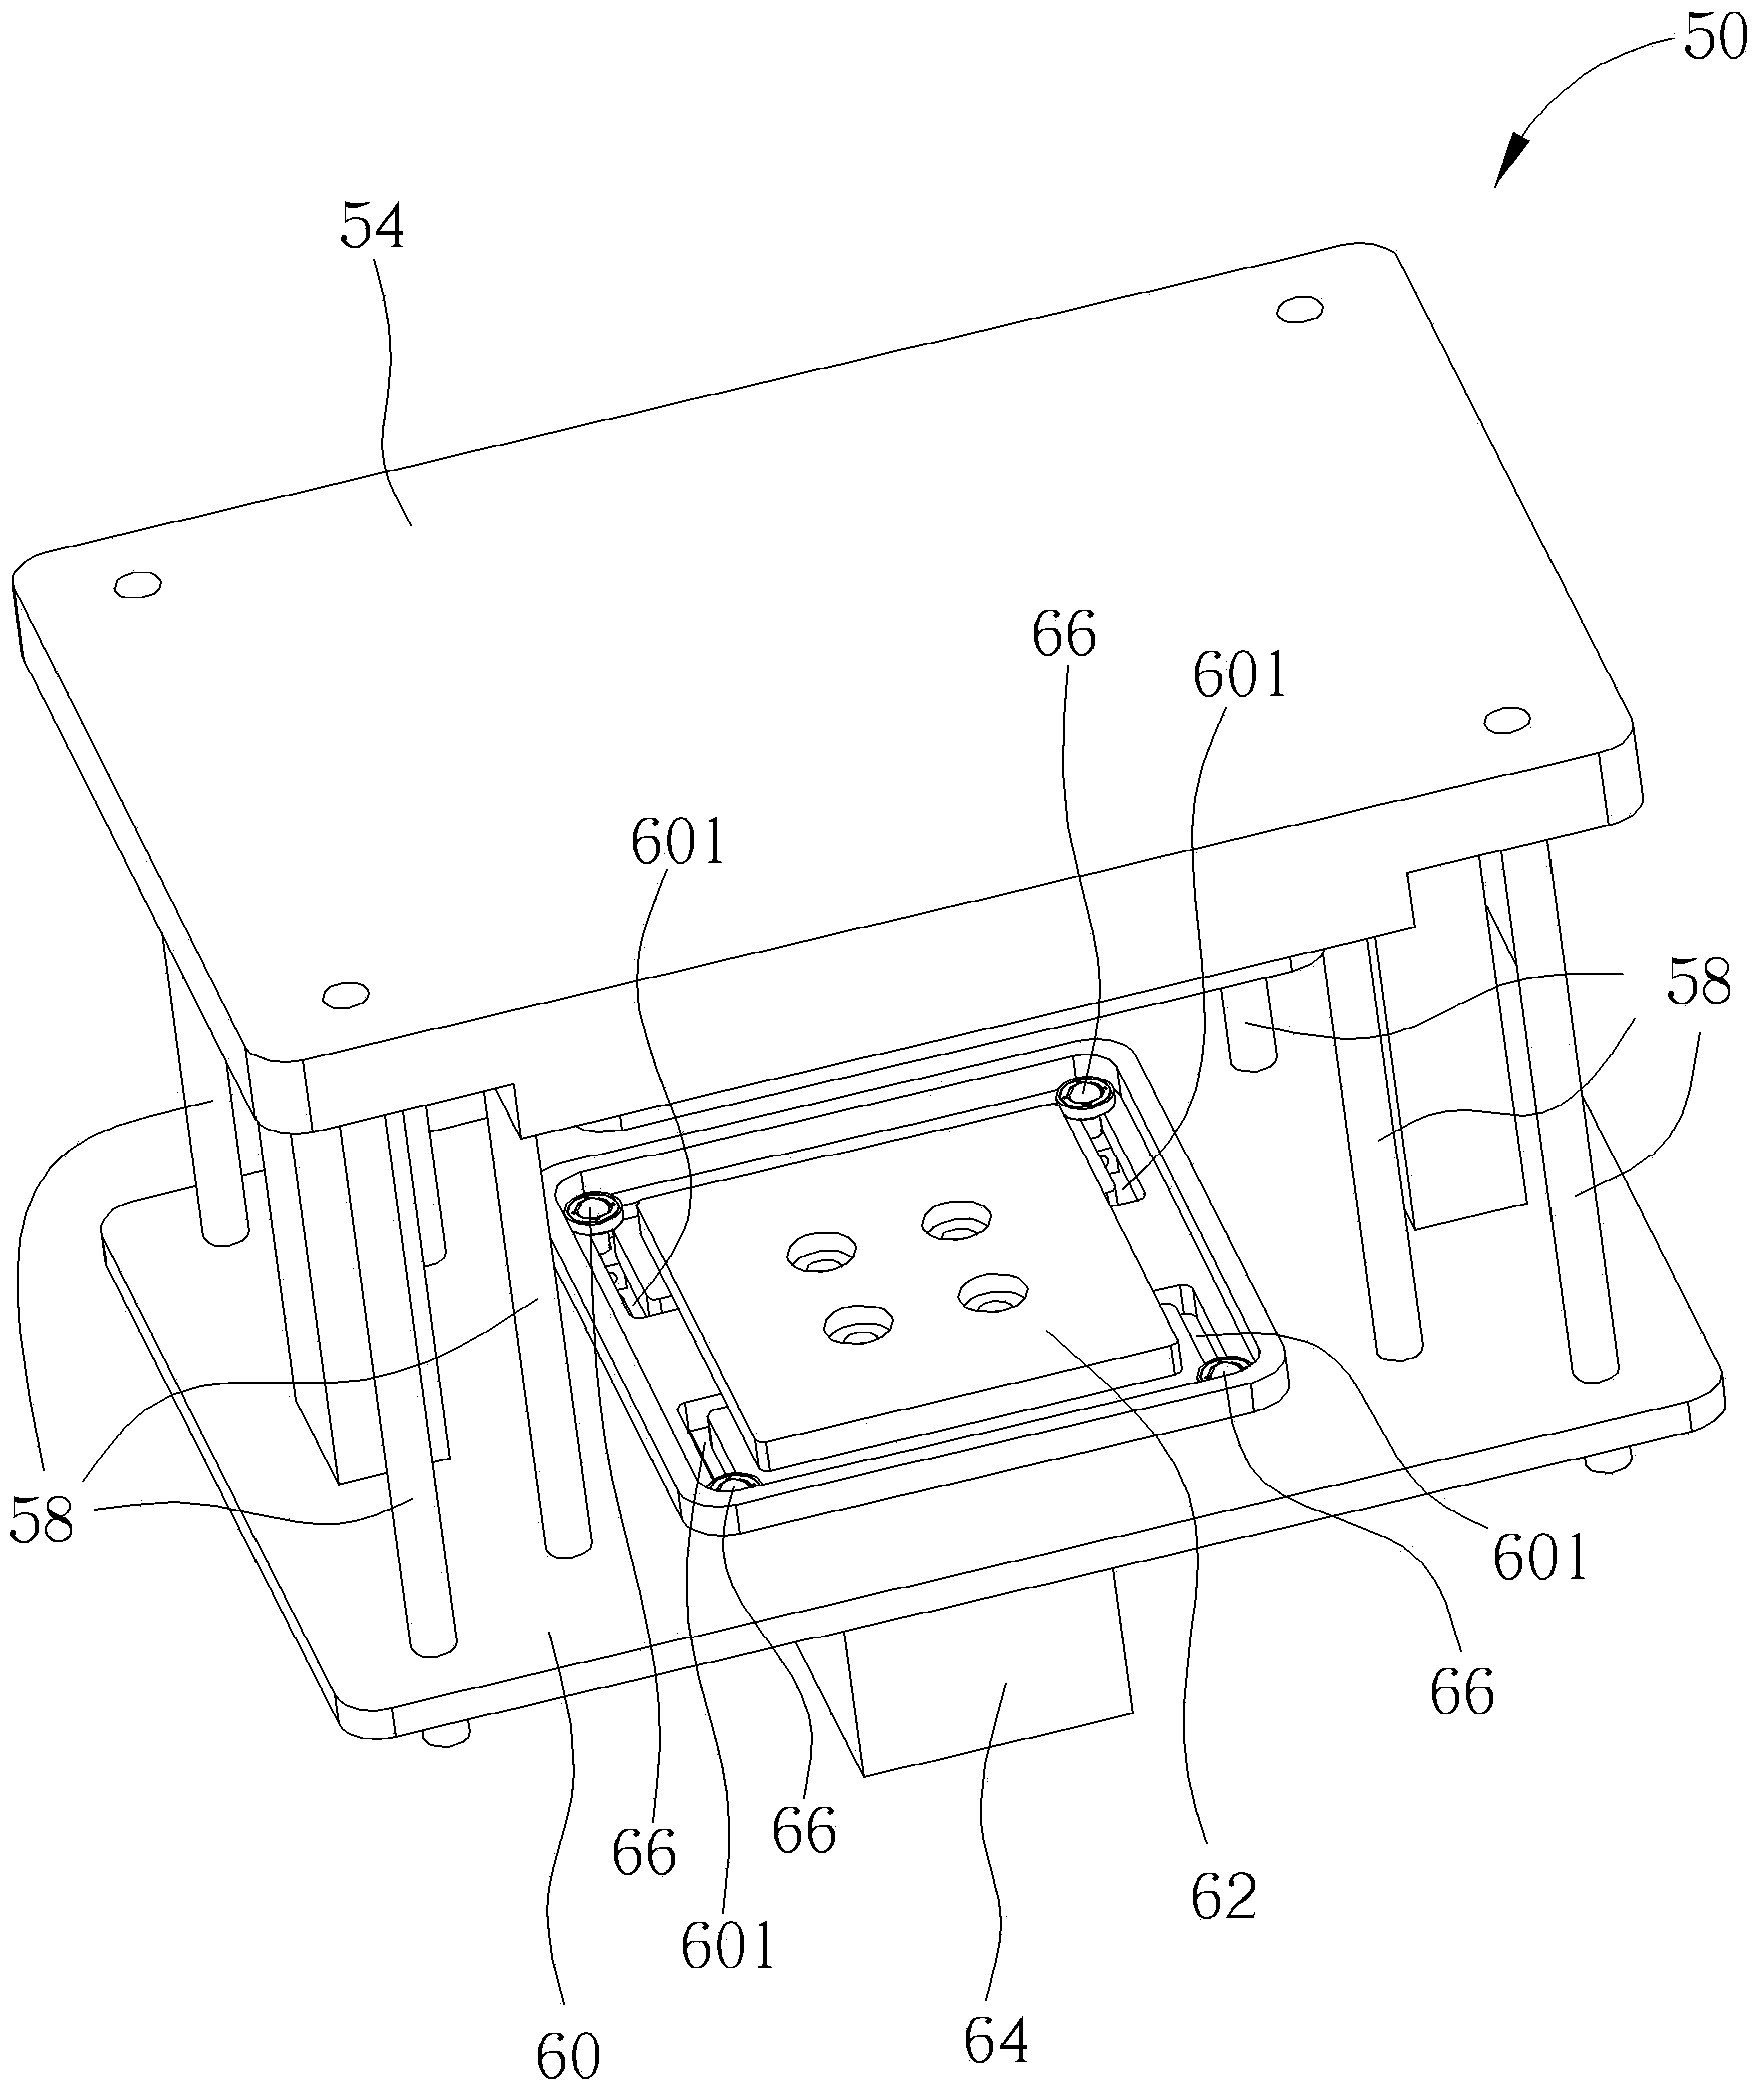 Test device and method for testing whether a workpiece is positioned correctly